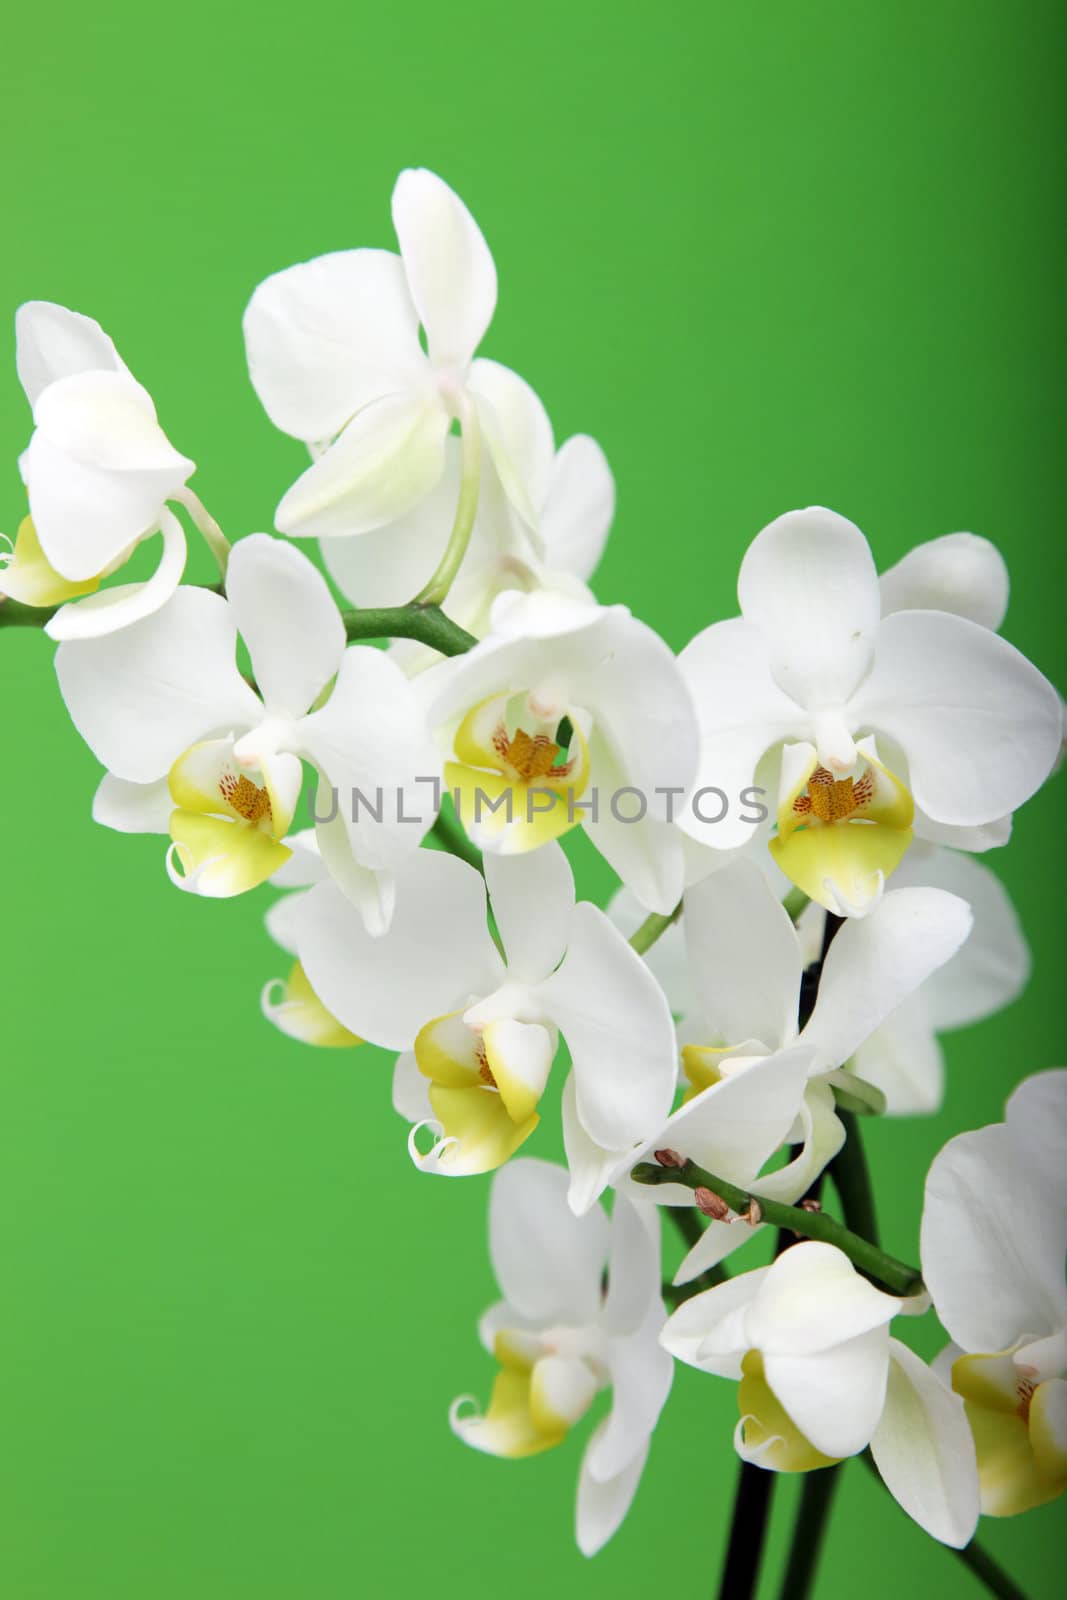 Spray of fresh white Cymbidium orchids on a vertical green background